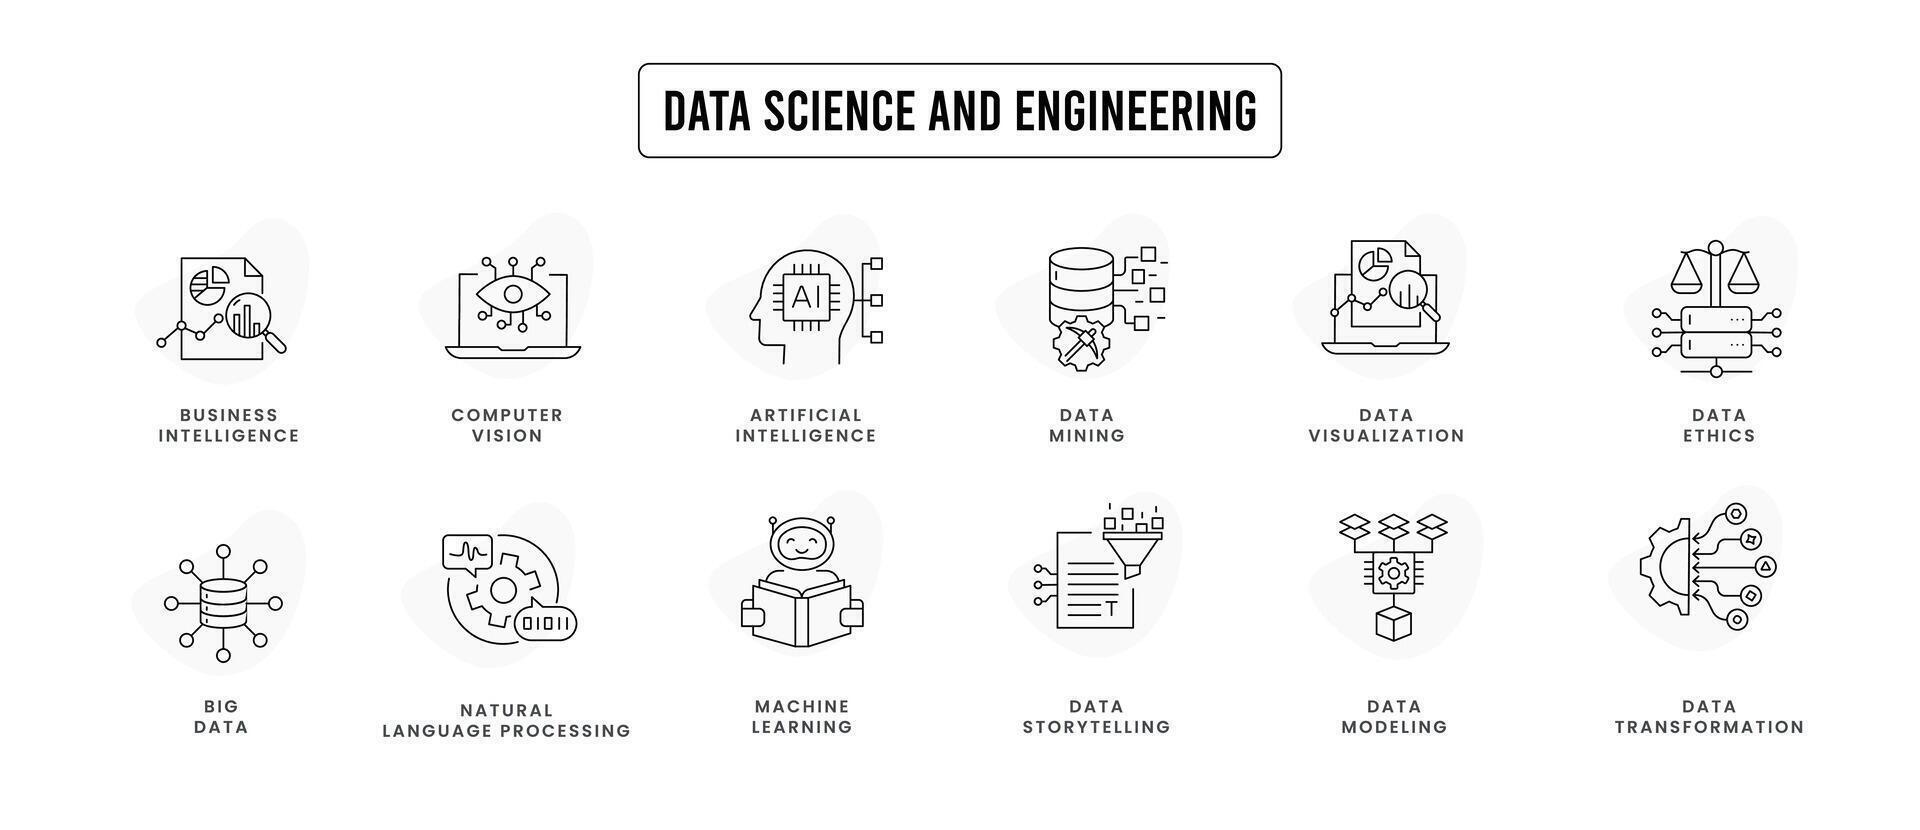 Data science and engineering icons. modeling, transformation, mining, storytelling, visualization, big data, computer vision, natural language processing, AI, ML, and data ethics. vector